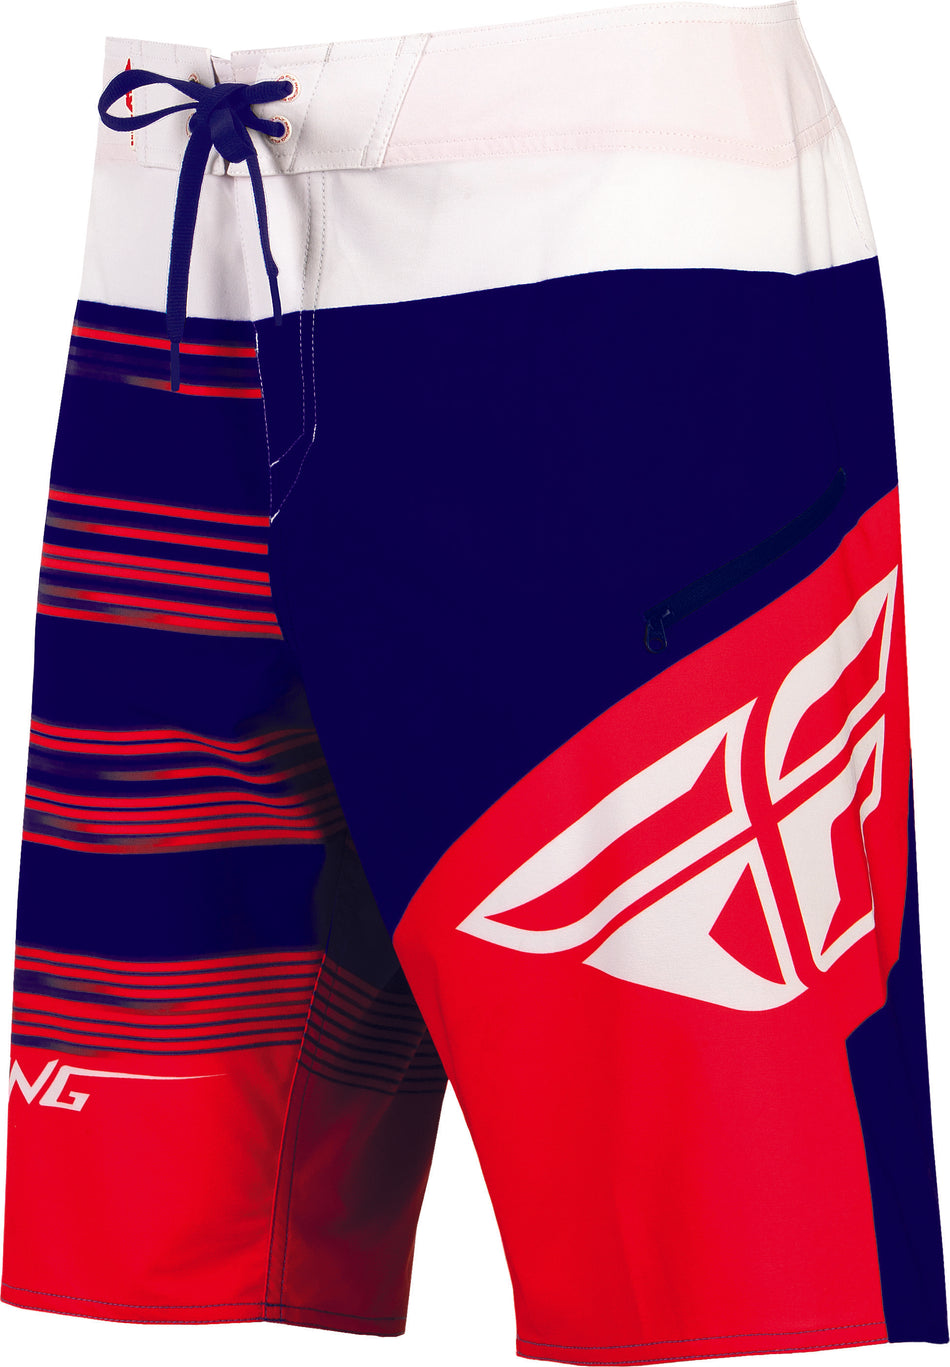 FLY RACING Influx Boardshorts Red/Blue/White Sz 34 353-19234